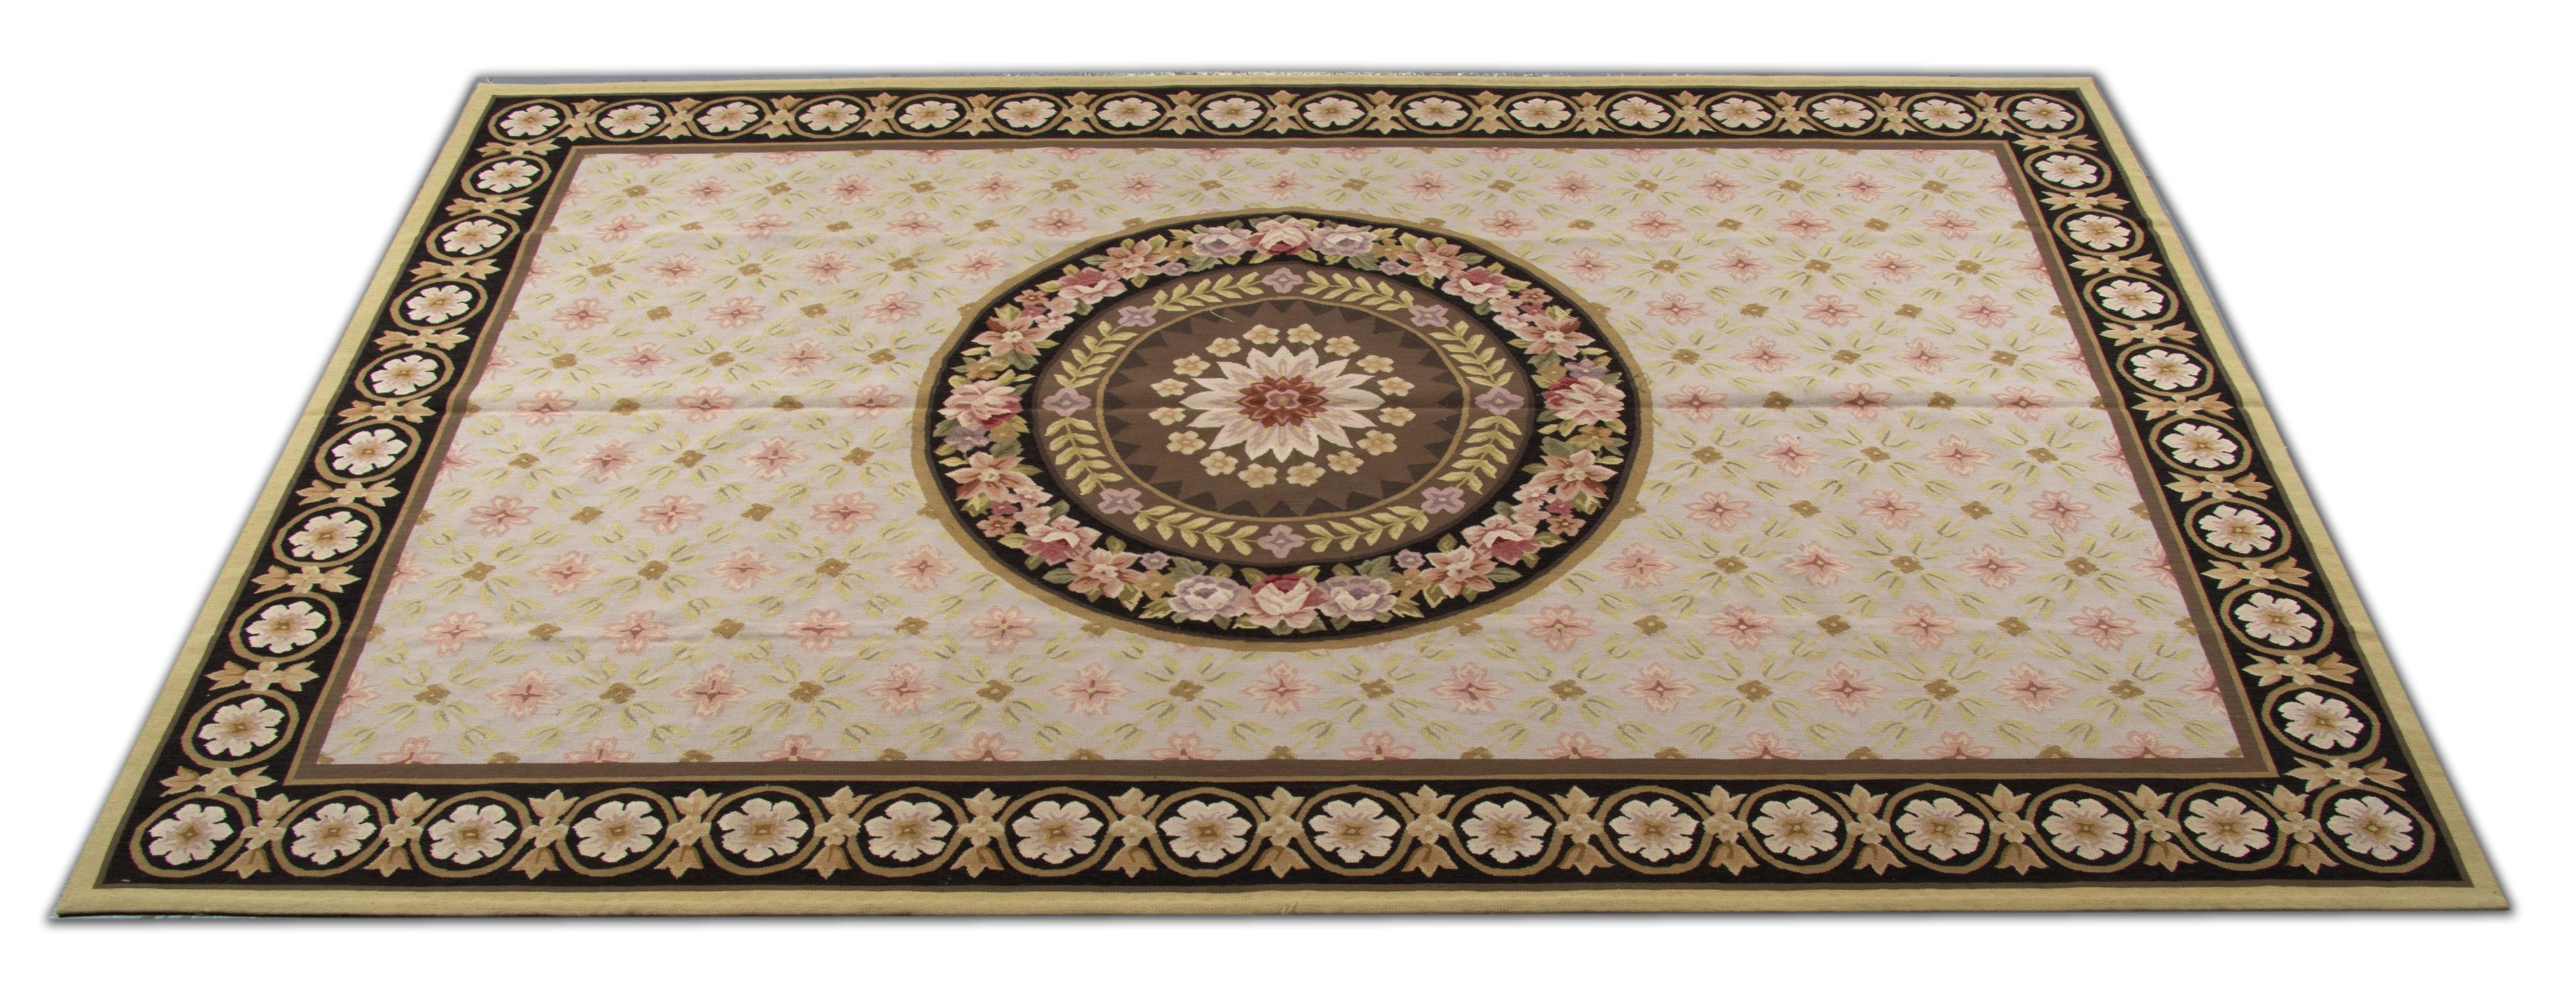 This elegantly handwoven needlepoint Aubusson features a truly unique design with a circular central medallion decorated with beautiful floral design and an all-over repeat pattern surround design. The medallion and border are woven in the same